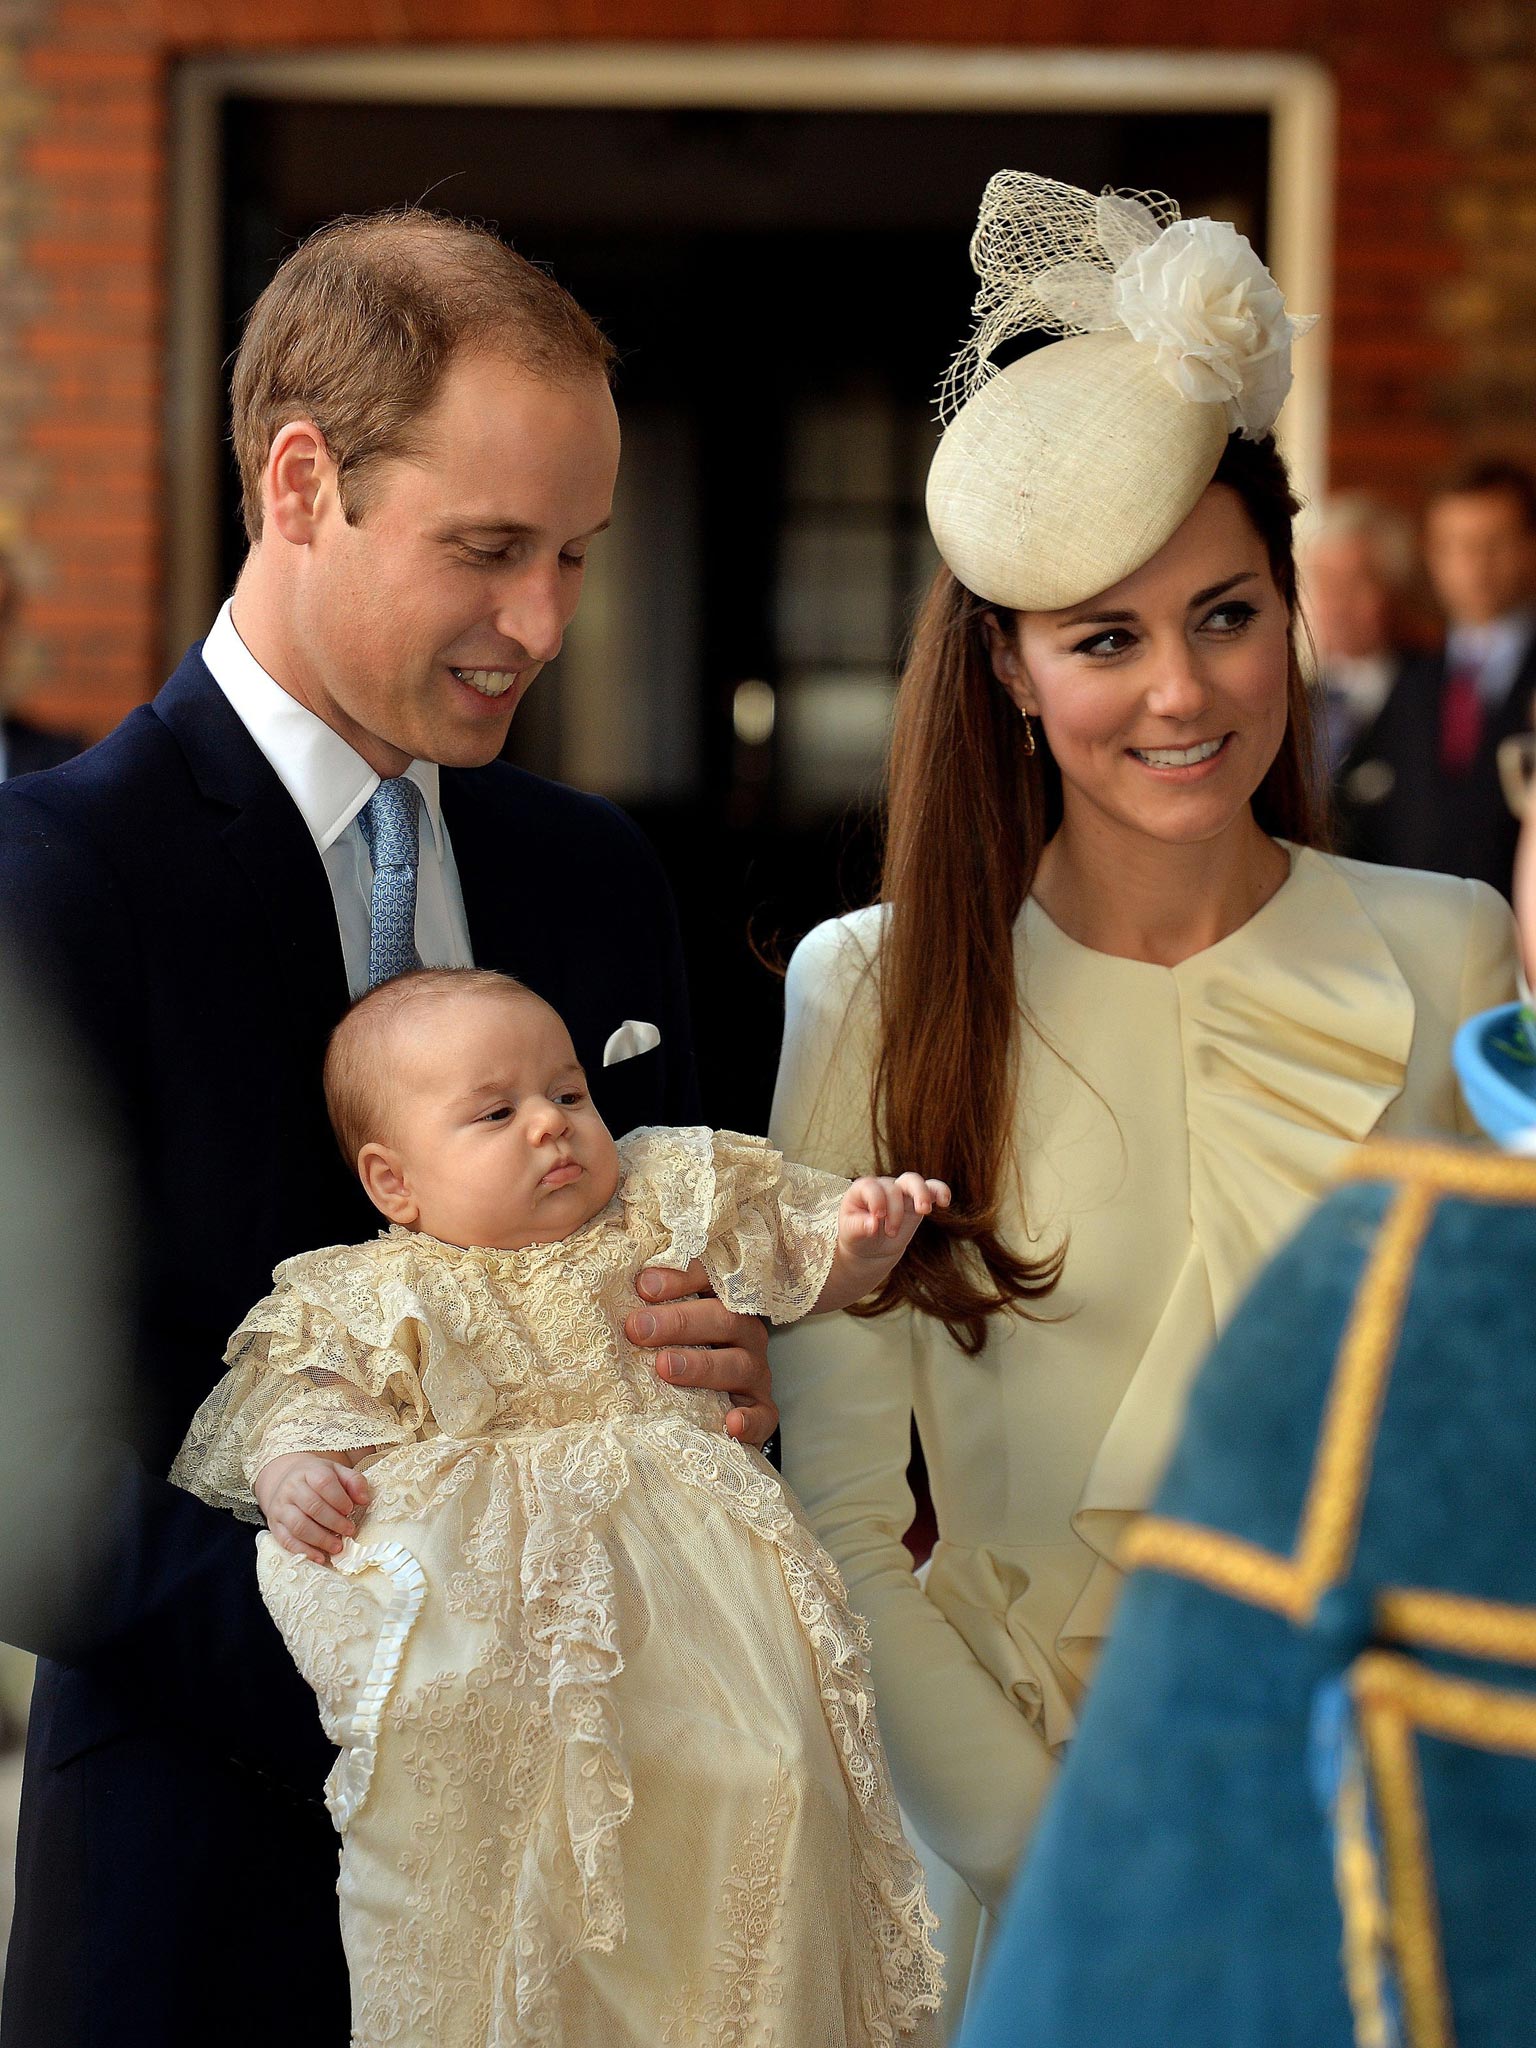 Prince William, Kate Duchess of Cambridge with their son Prince George arrive at Chapel Royal in St James's Palace for the christening of the three month-old Prince George